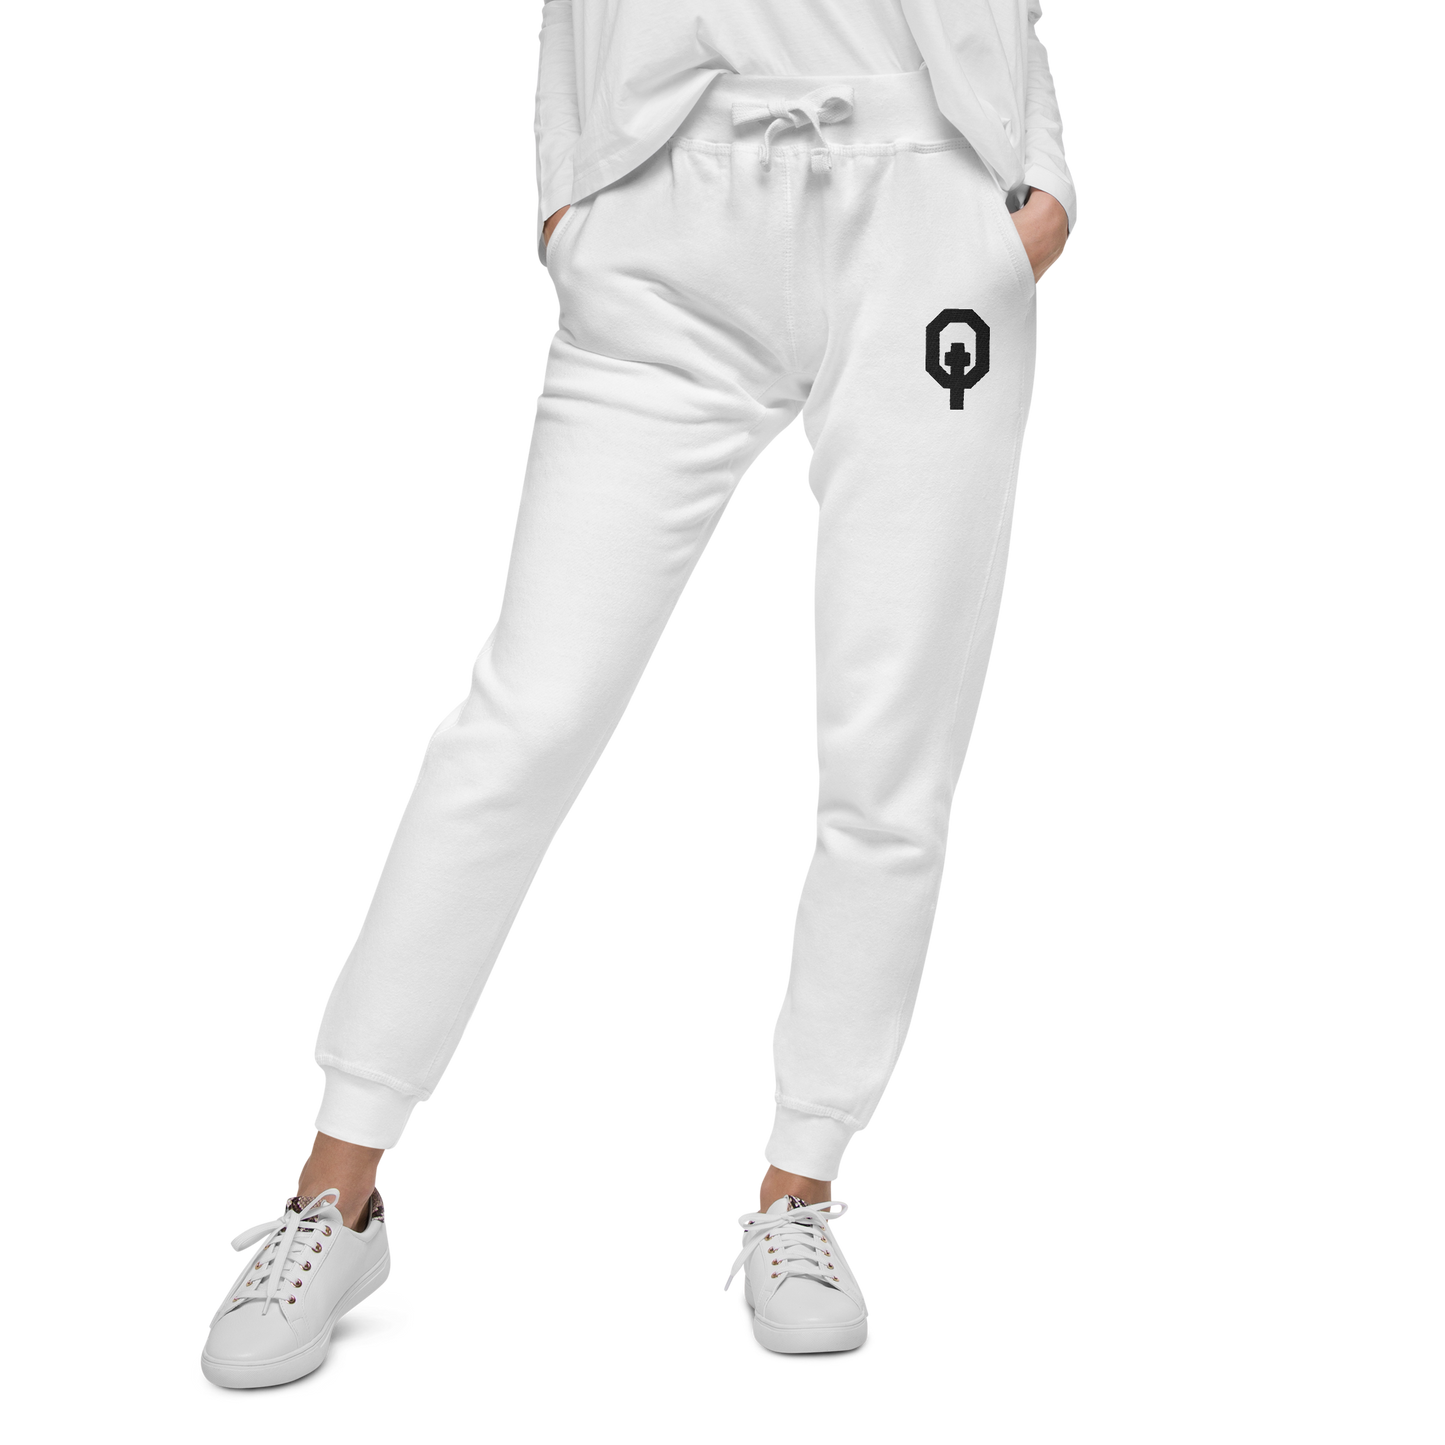 Equippd Logo White Sweats - Clarity Collection